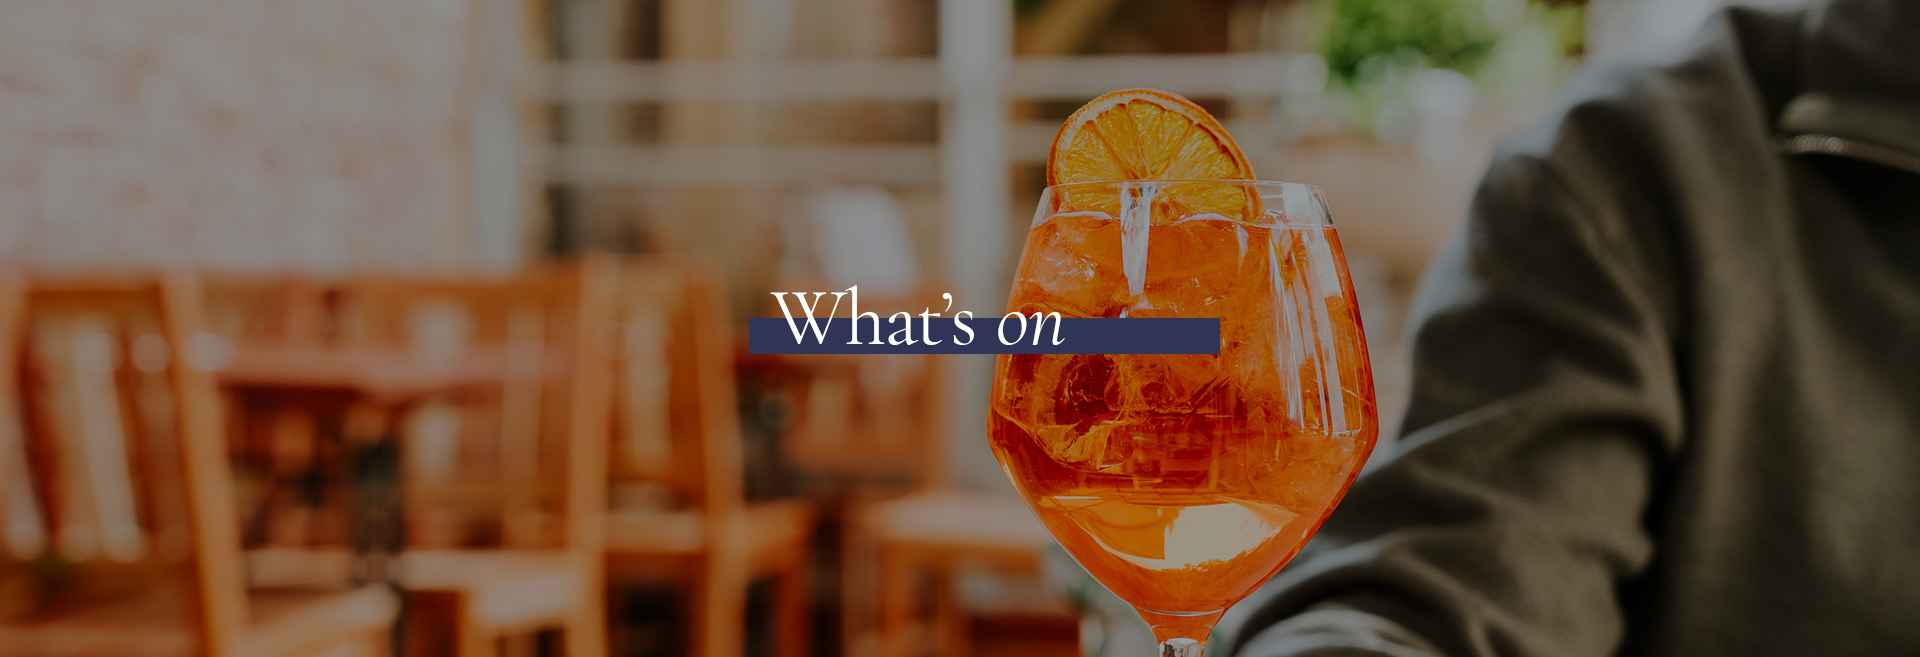 What's On at The Spaniards Inn